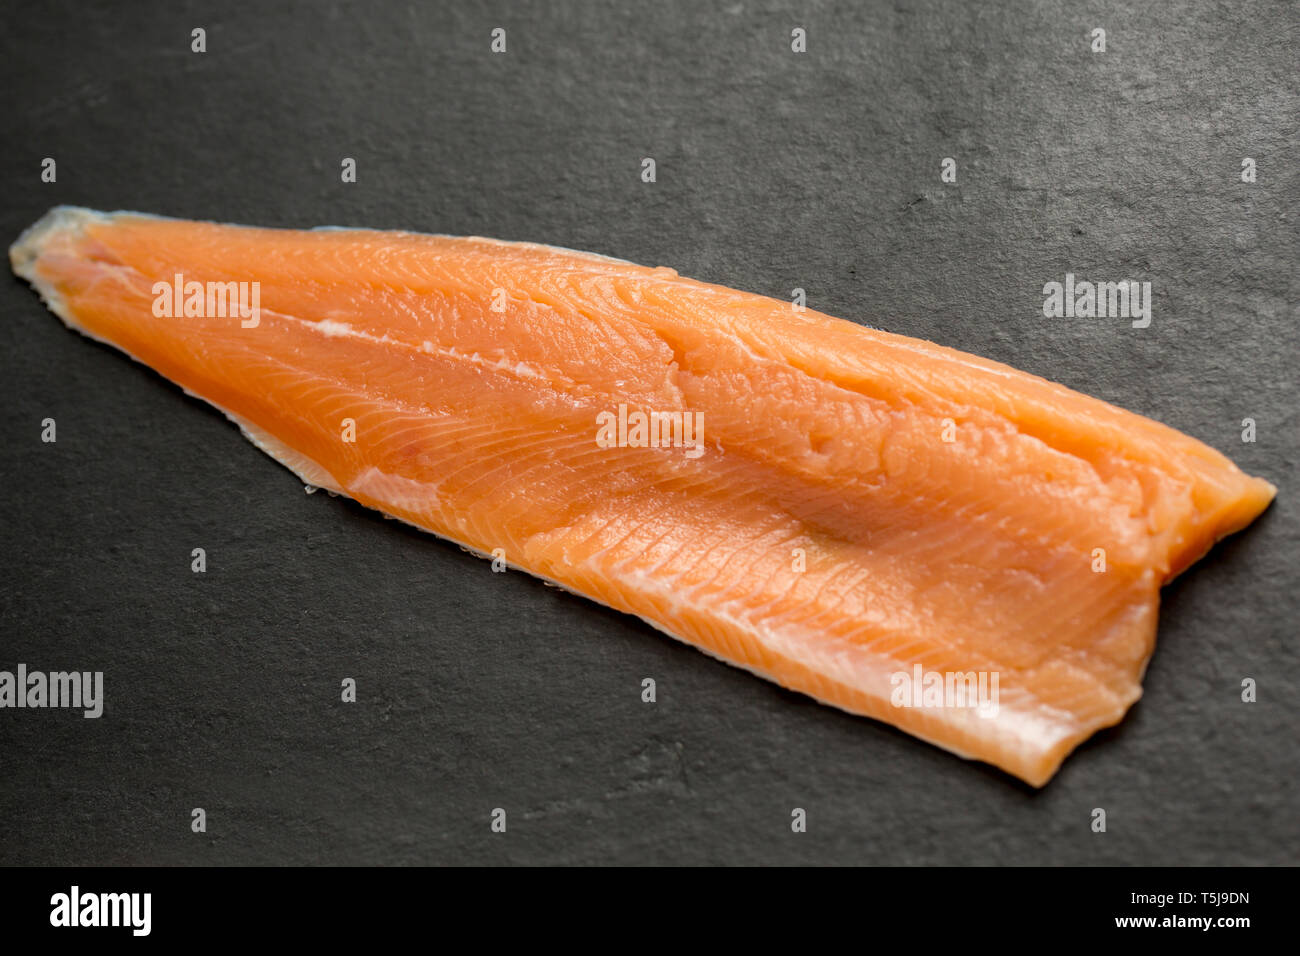 A single, raw fillet from a rainbow trout, Oncorhynchus mykiss, that was caught fly fishing in a put and take reservoir stocked with rainbow trout. Fi Stock Photo